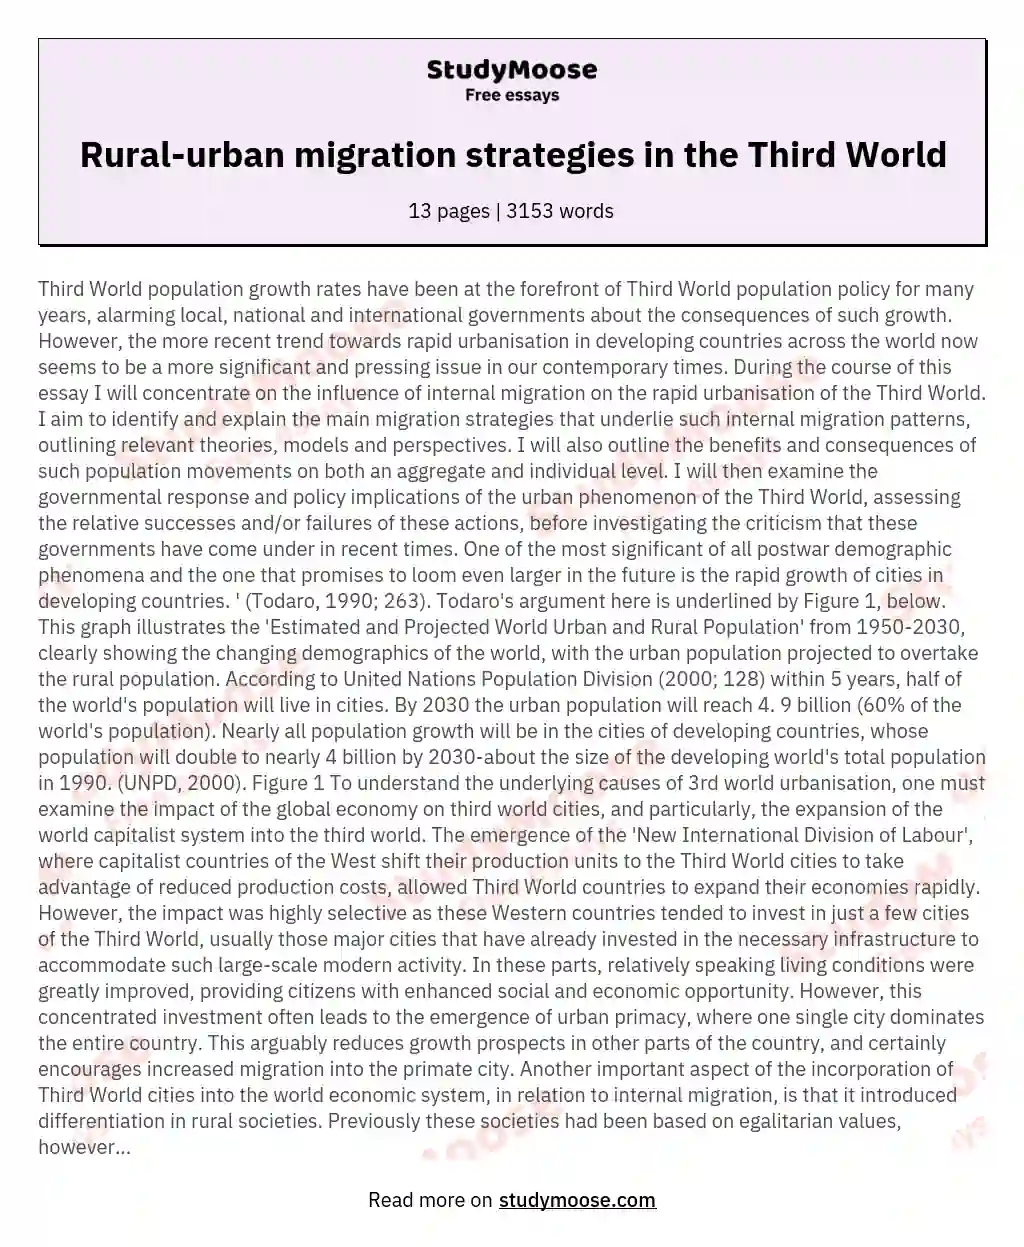 The main migration strategies underlying rural-urban population movements in the Third World